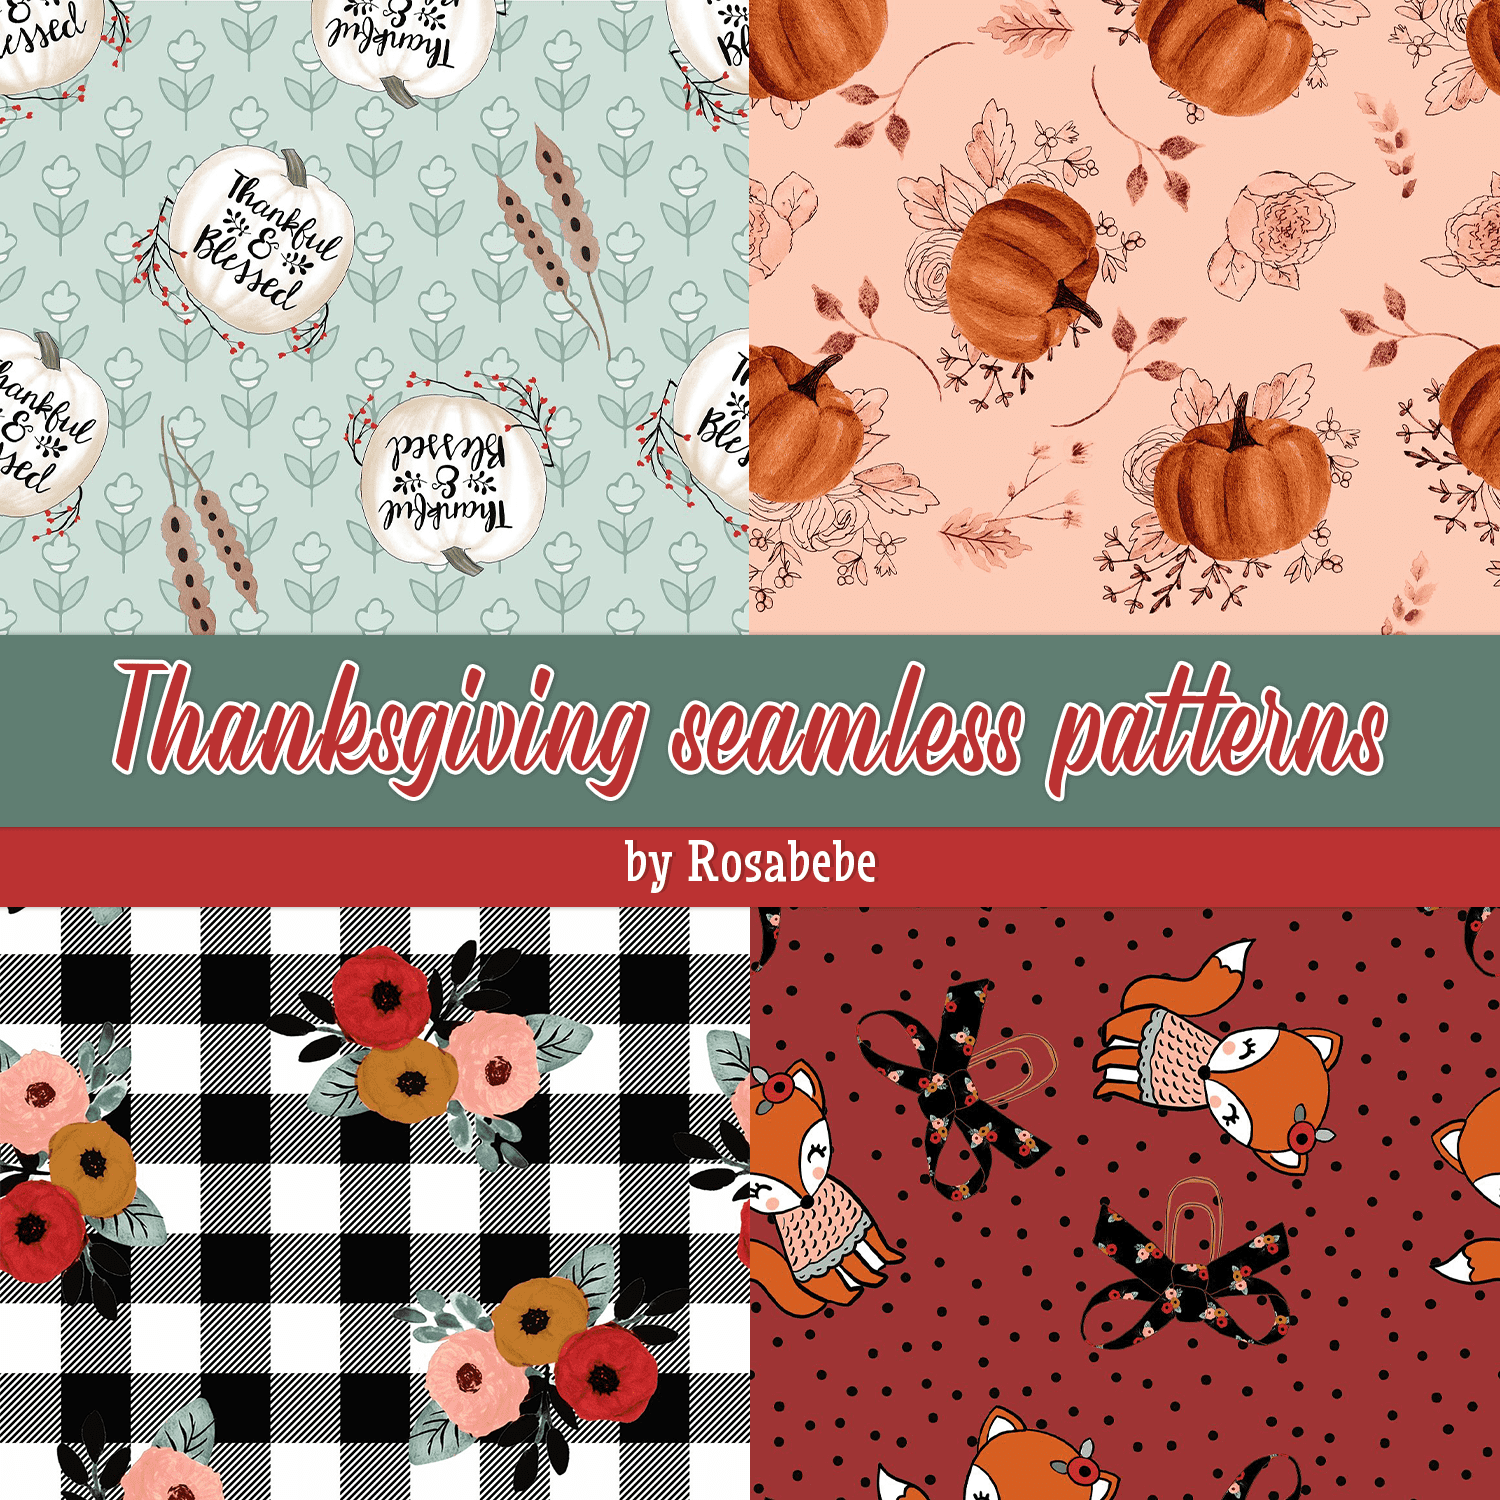 Thanksgiving seamless patterns cover.